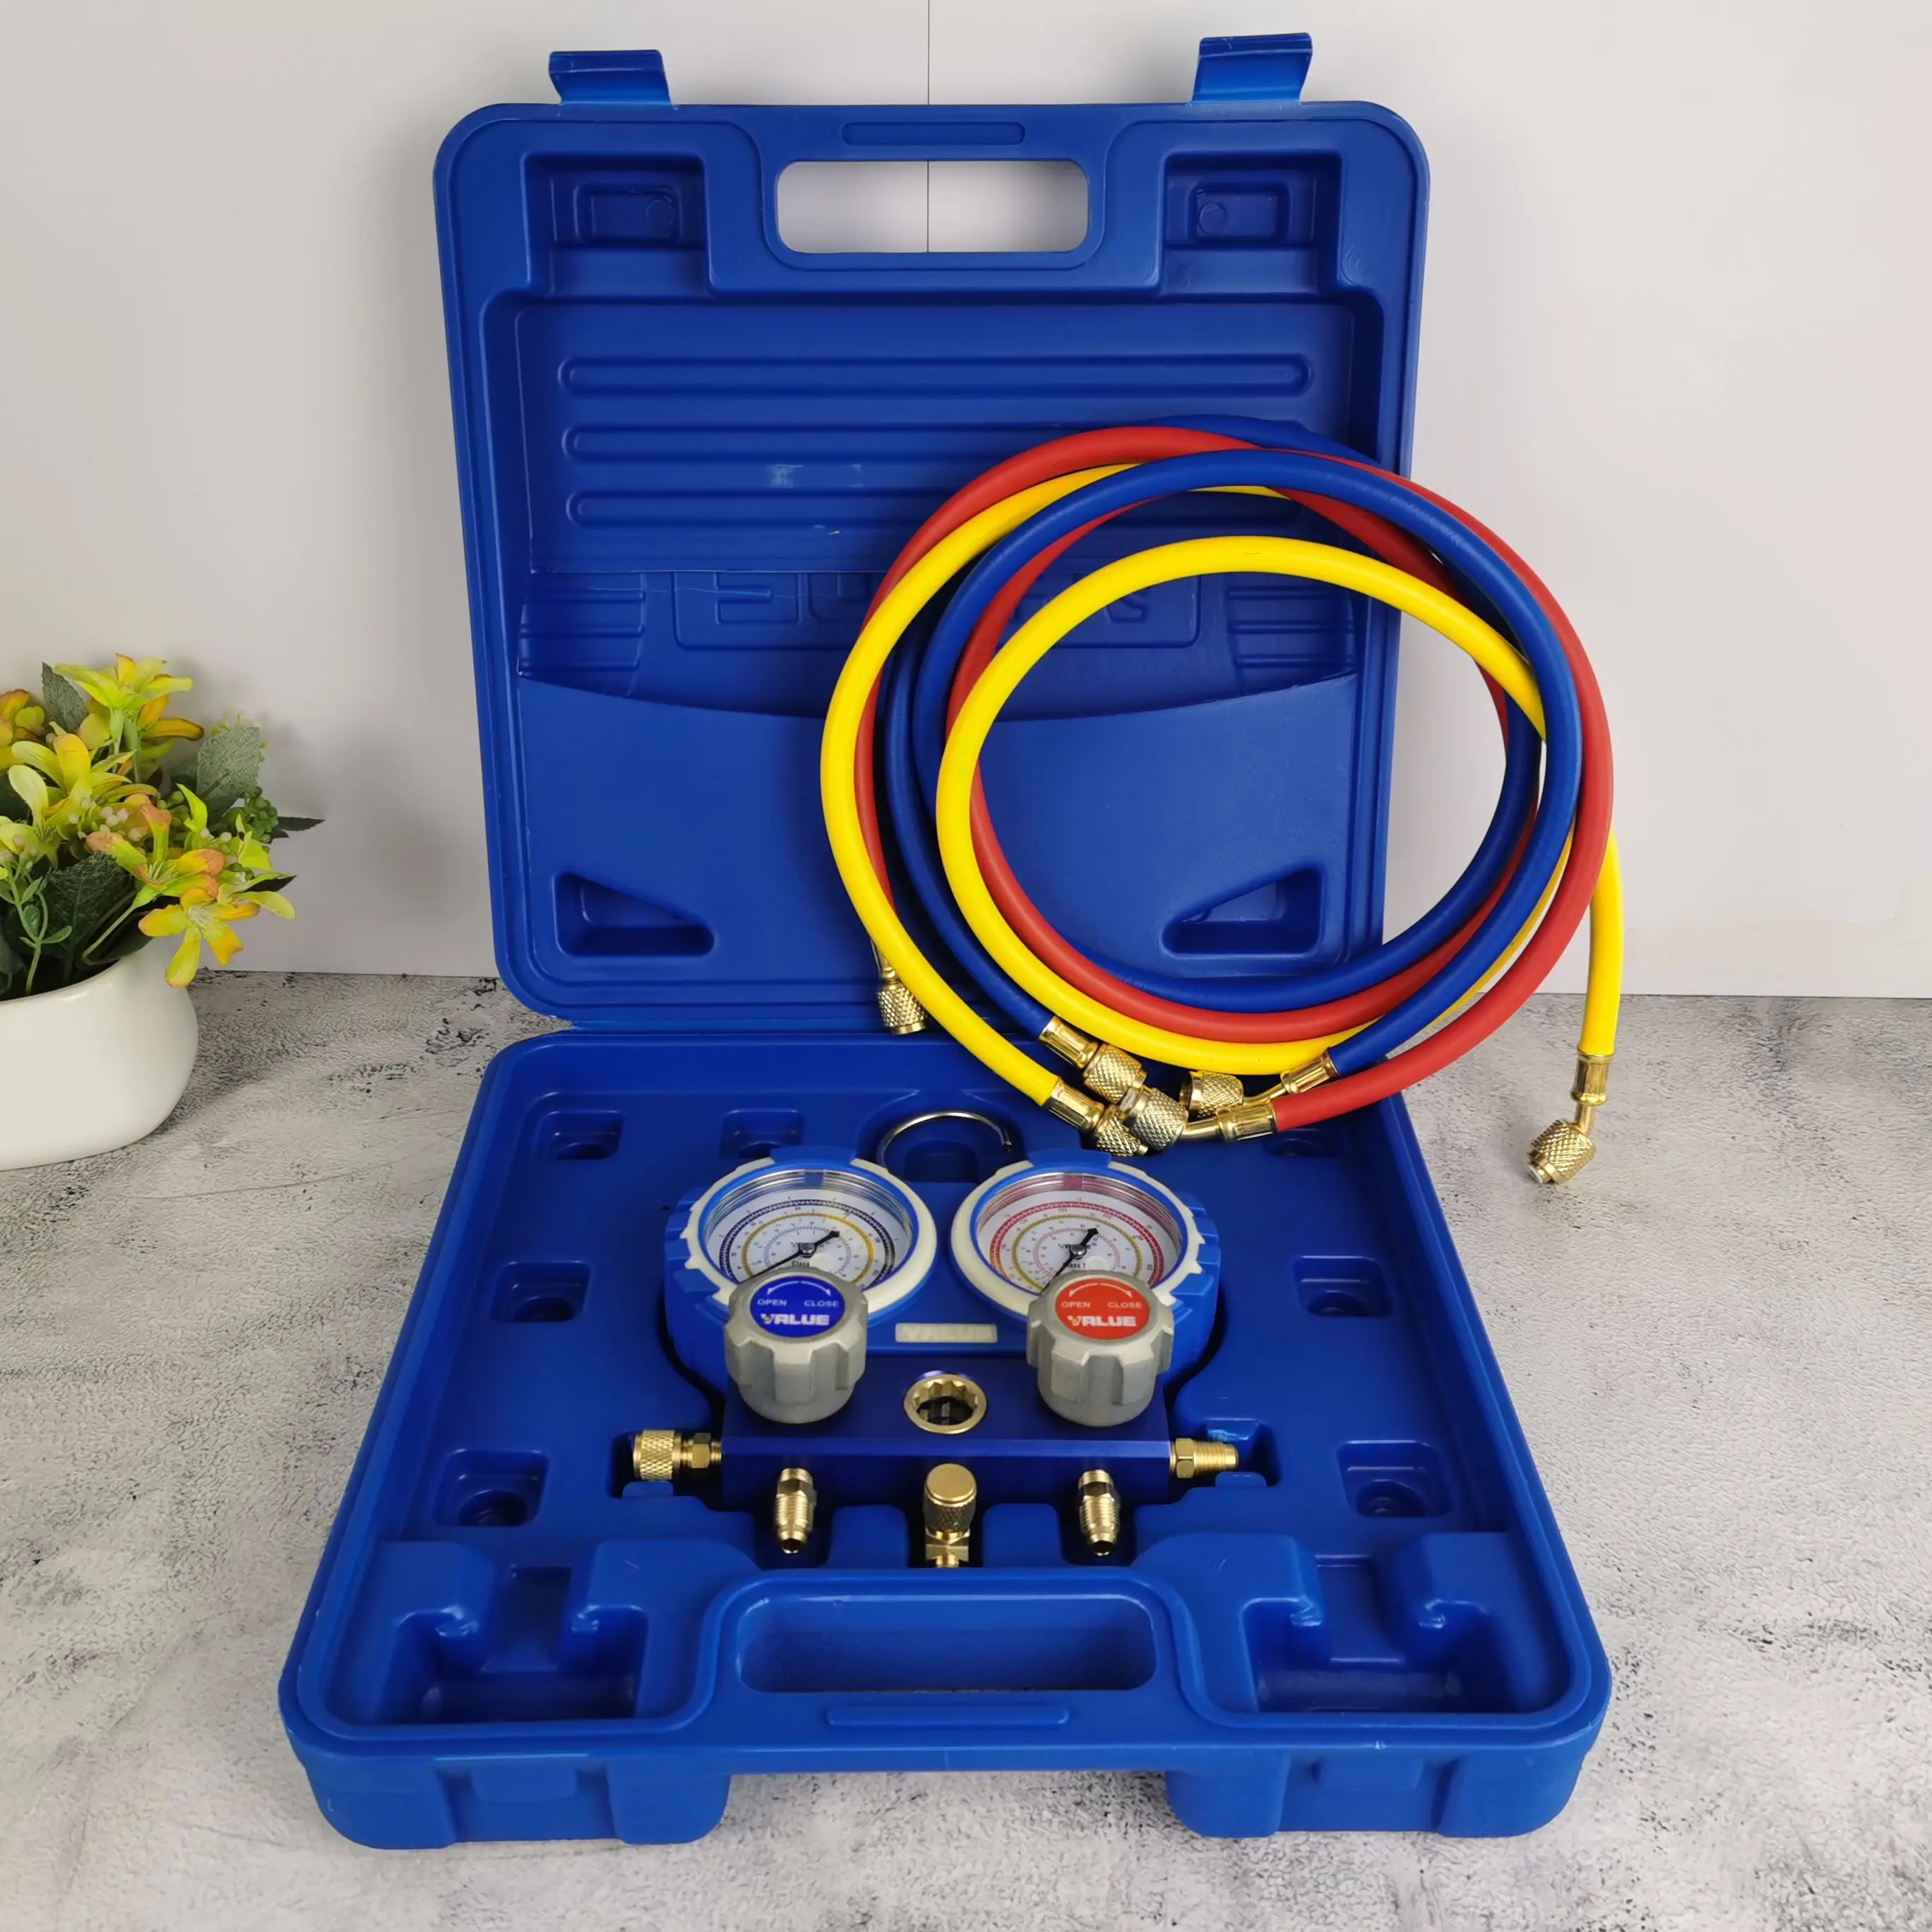 R22 Manifold Gauge set With Sight Glass VMG-2-R22-B with Blow case packing